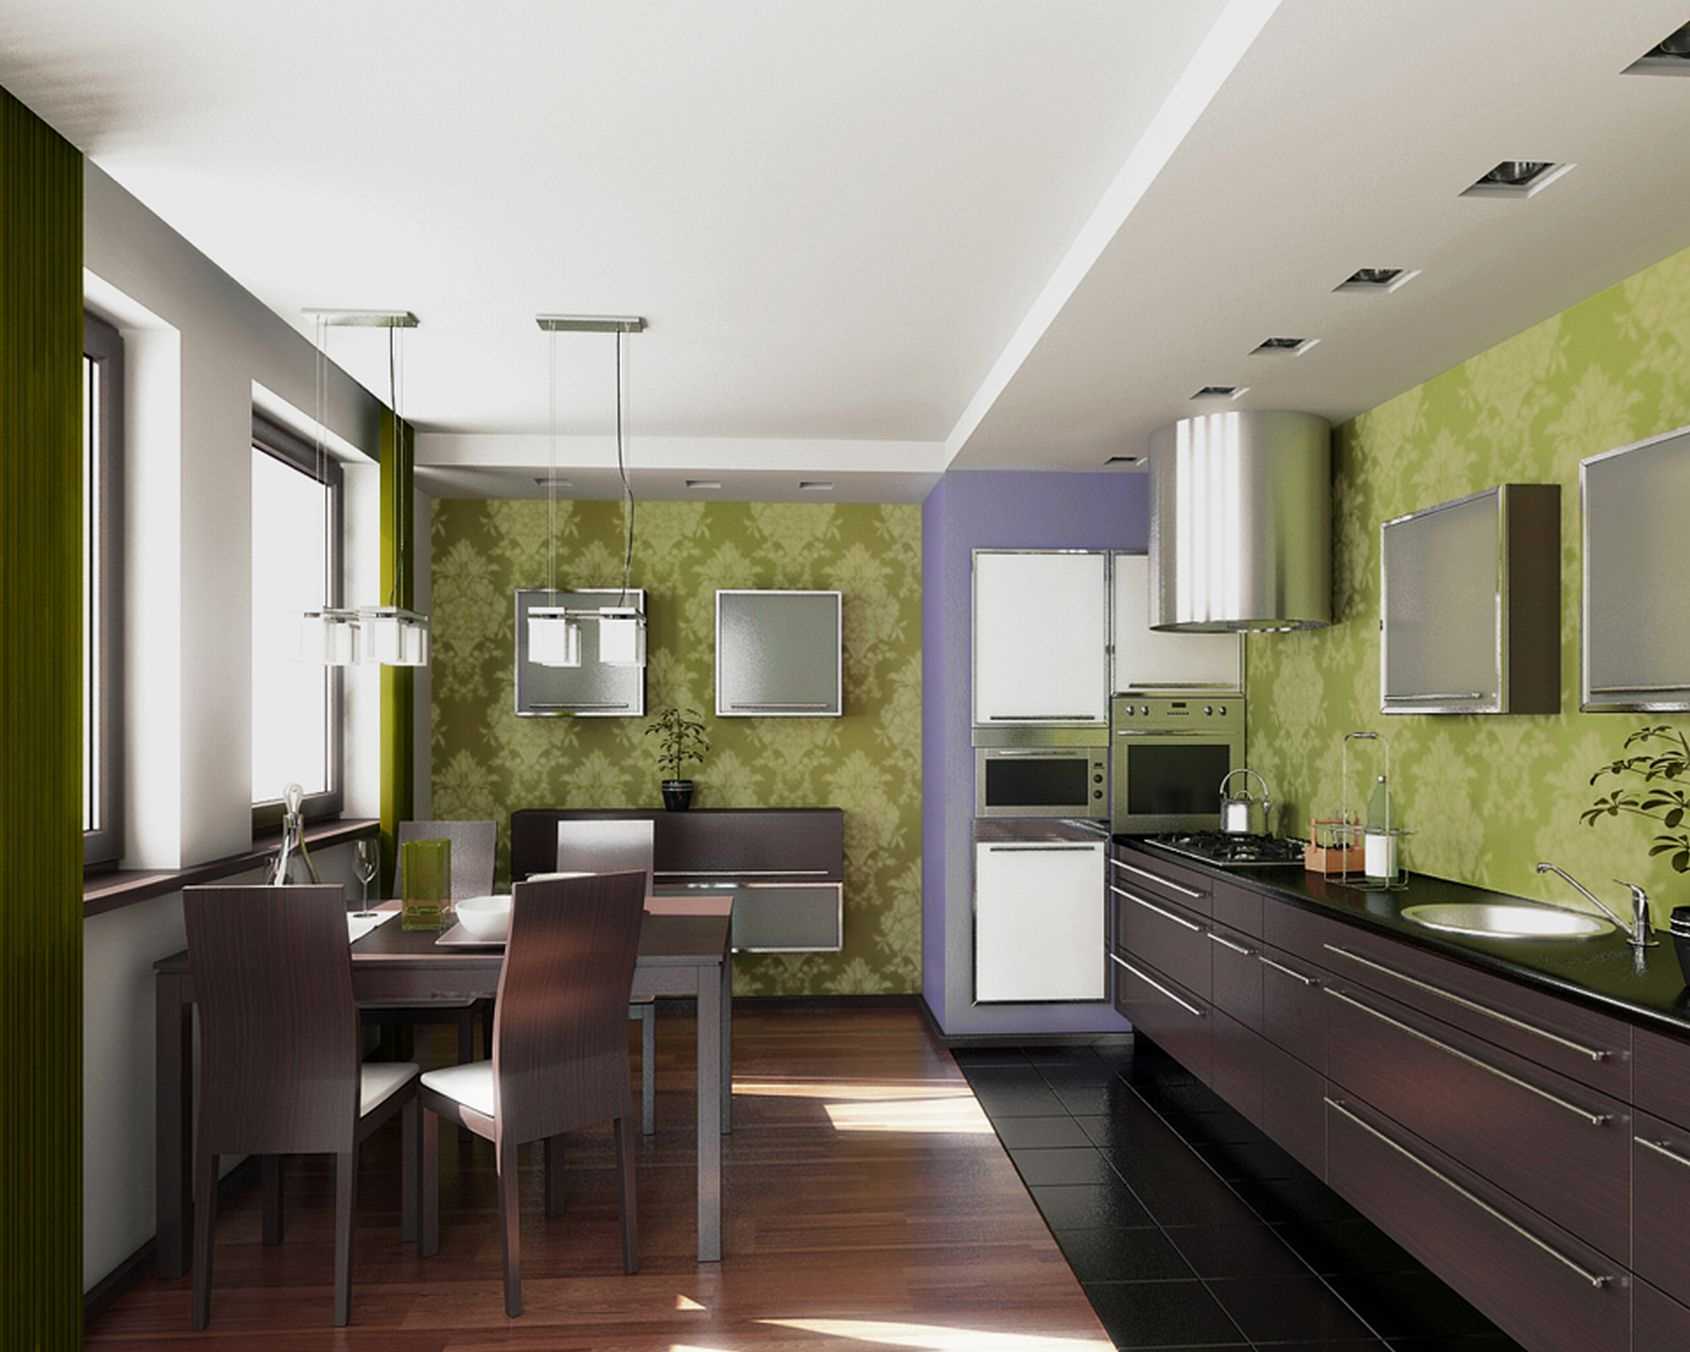 combination of bright colors in the interior of the kitchen